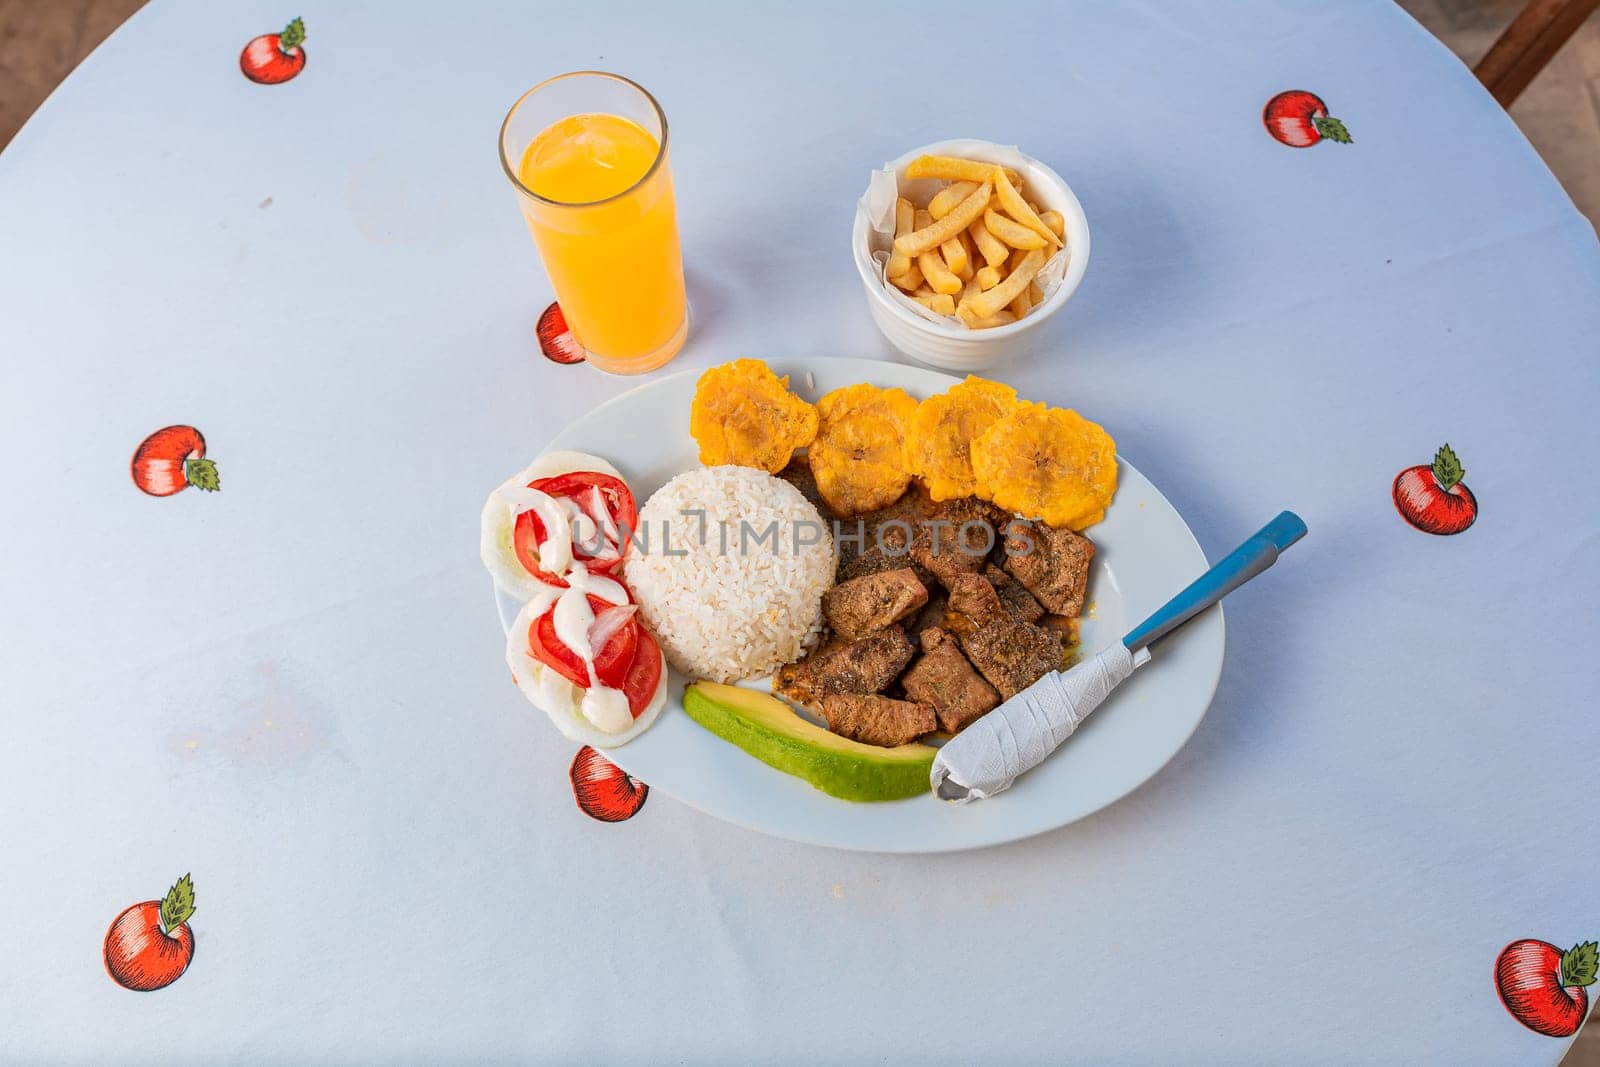 Tradicional lunch served at the table. Top view of traditional lunch with orange juice on the table.